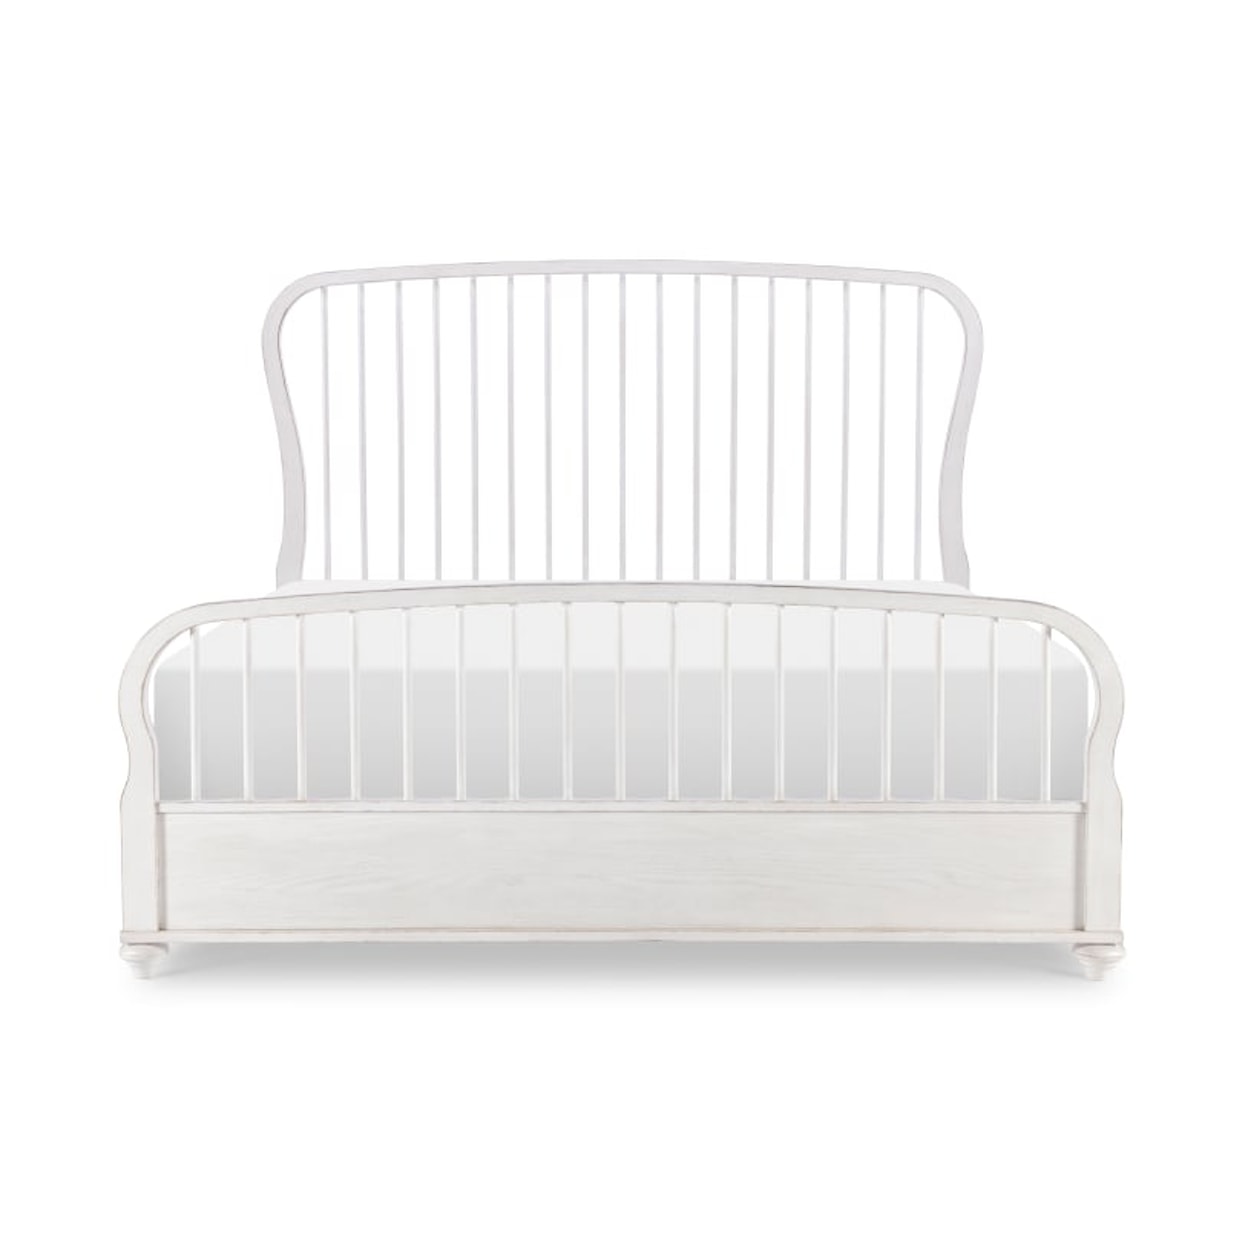 Legacy Classic Cottage Park Bed